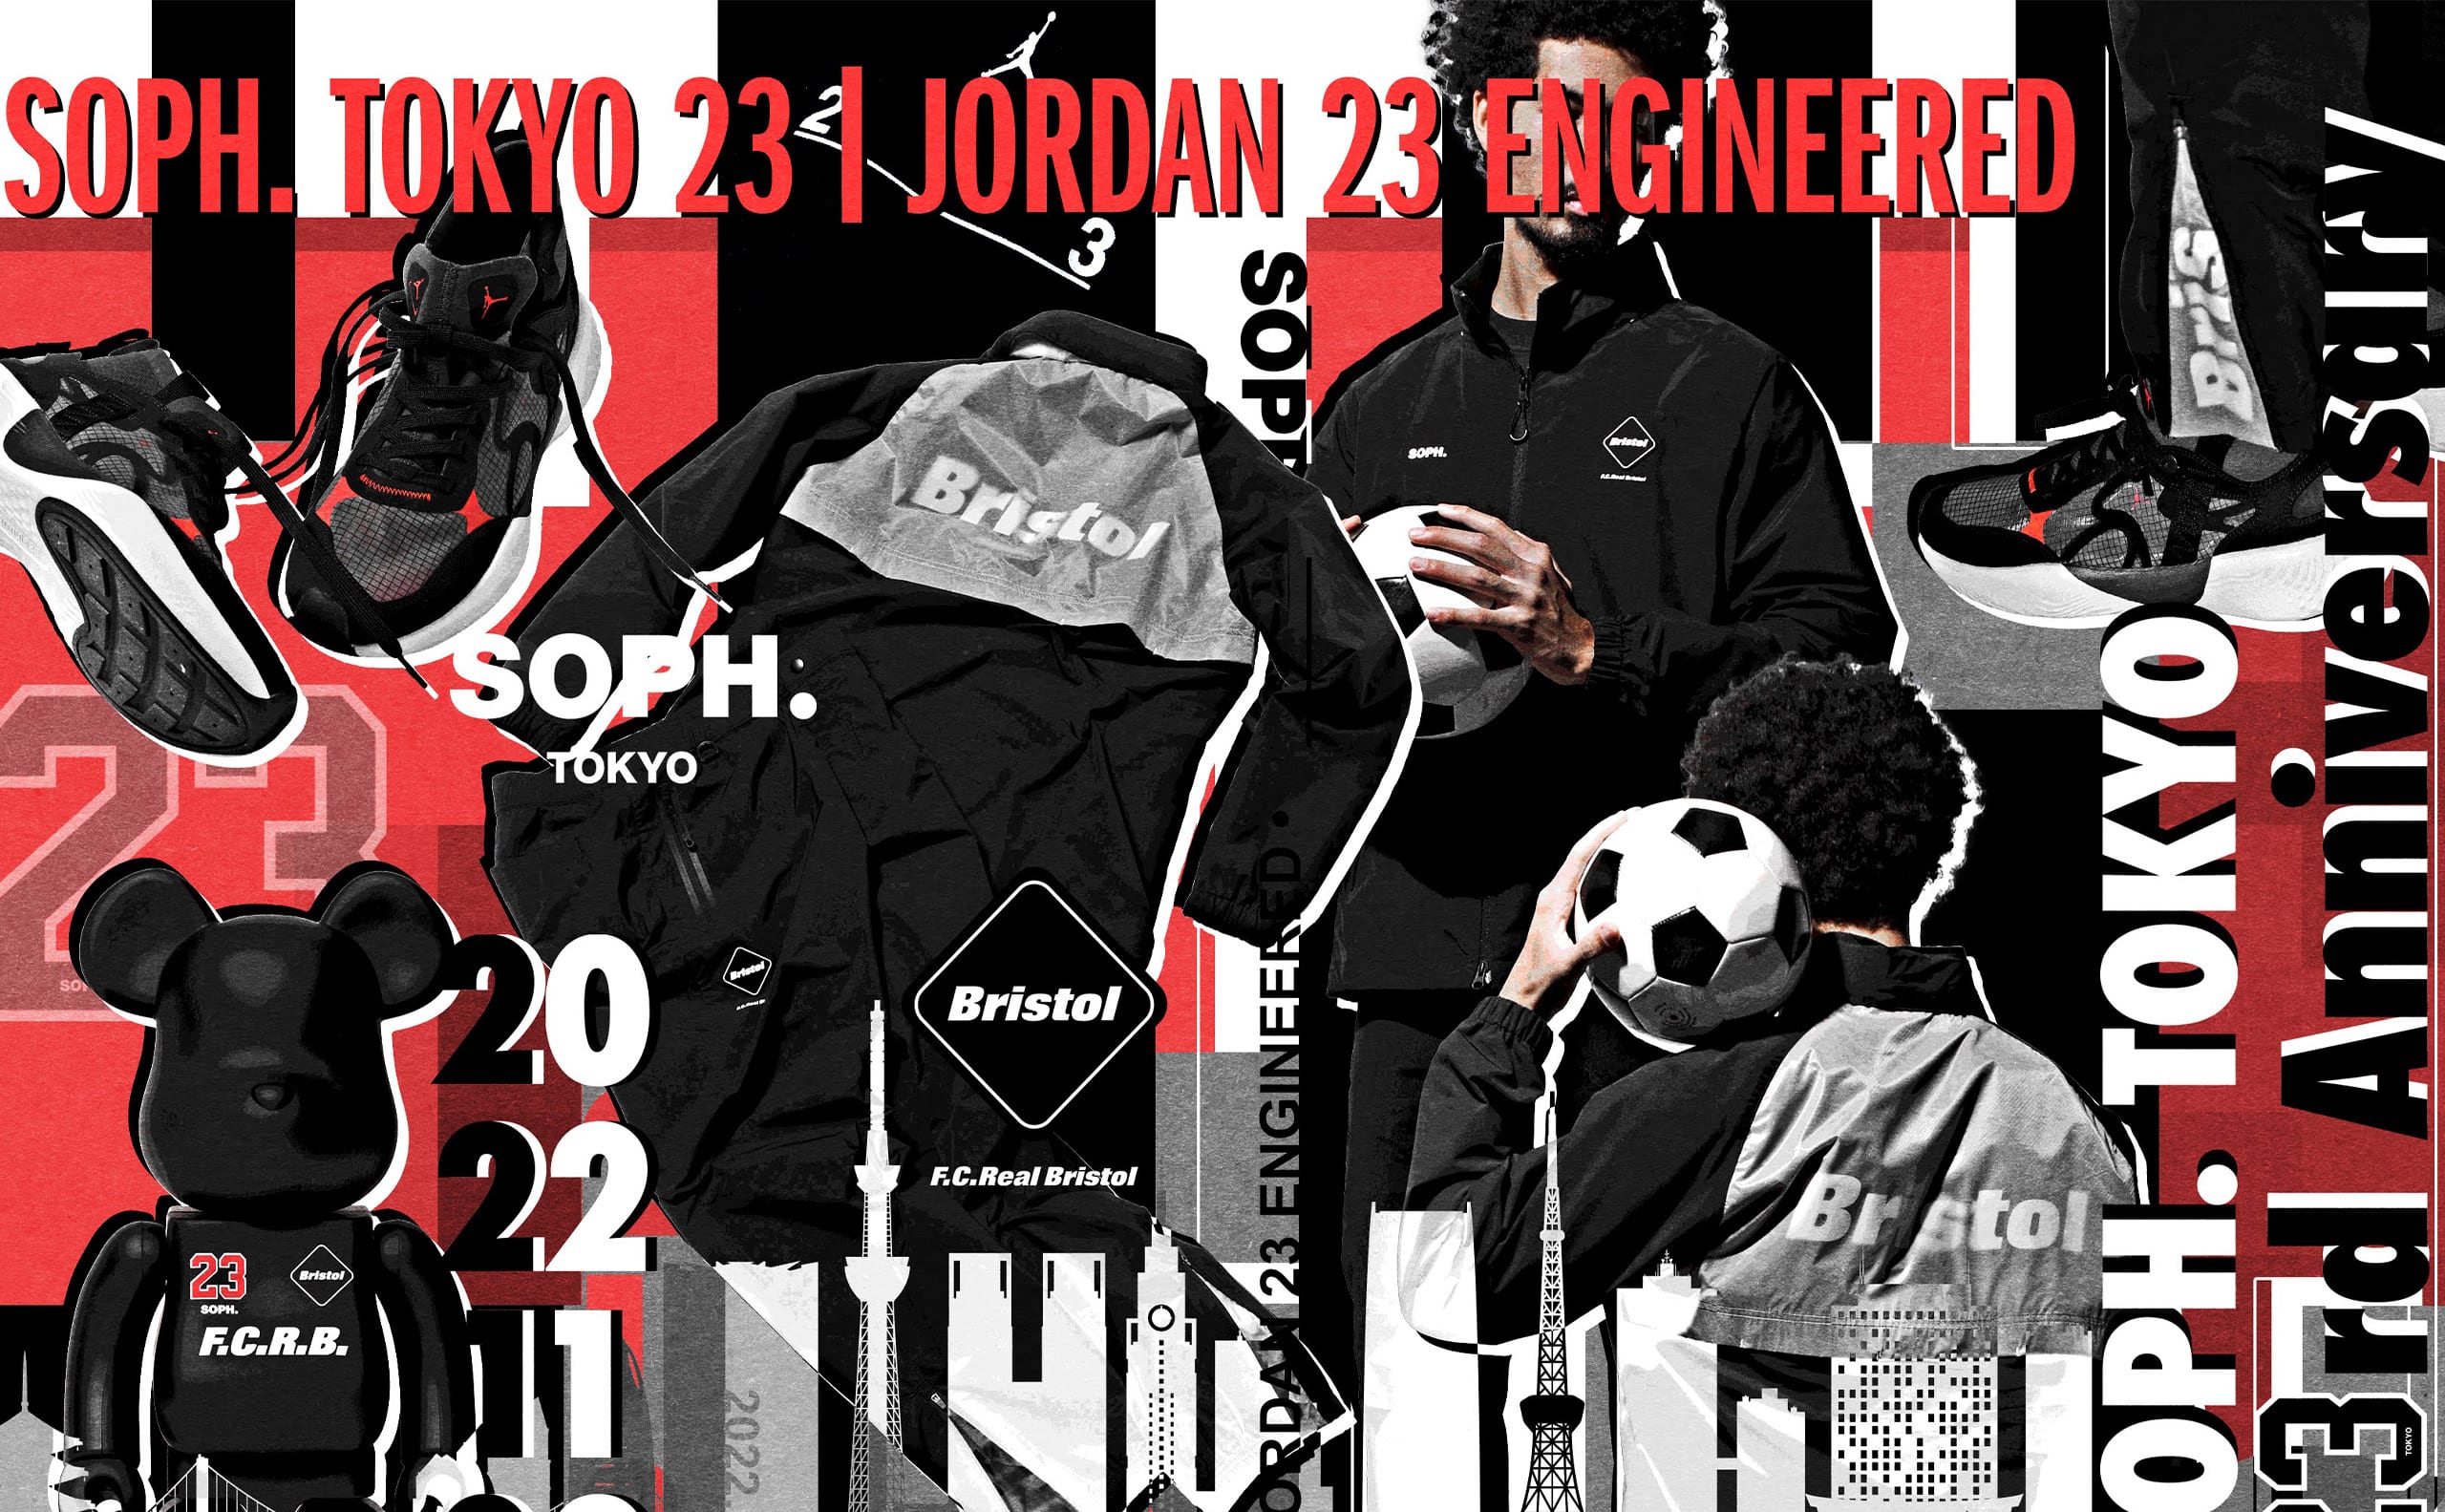 "SOPH. TOKYO 23rd  ANNIVERSARY PRODUCTS"